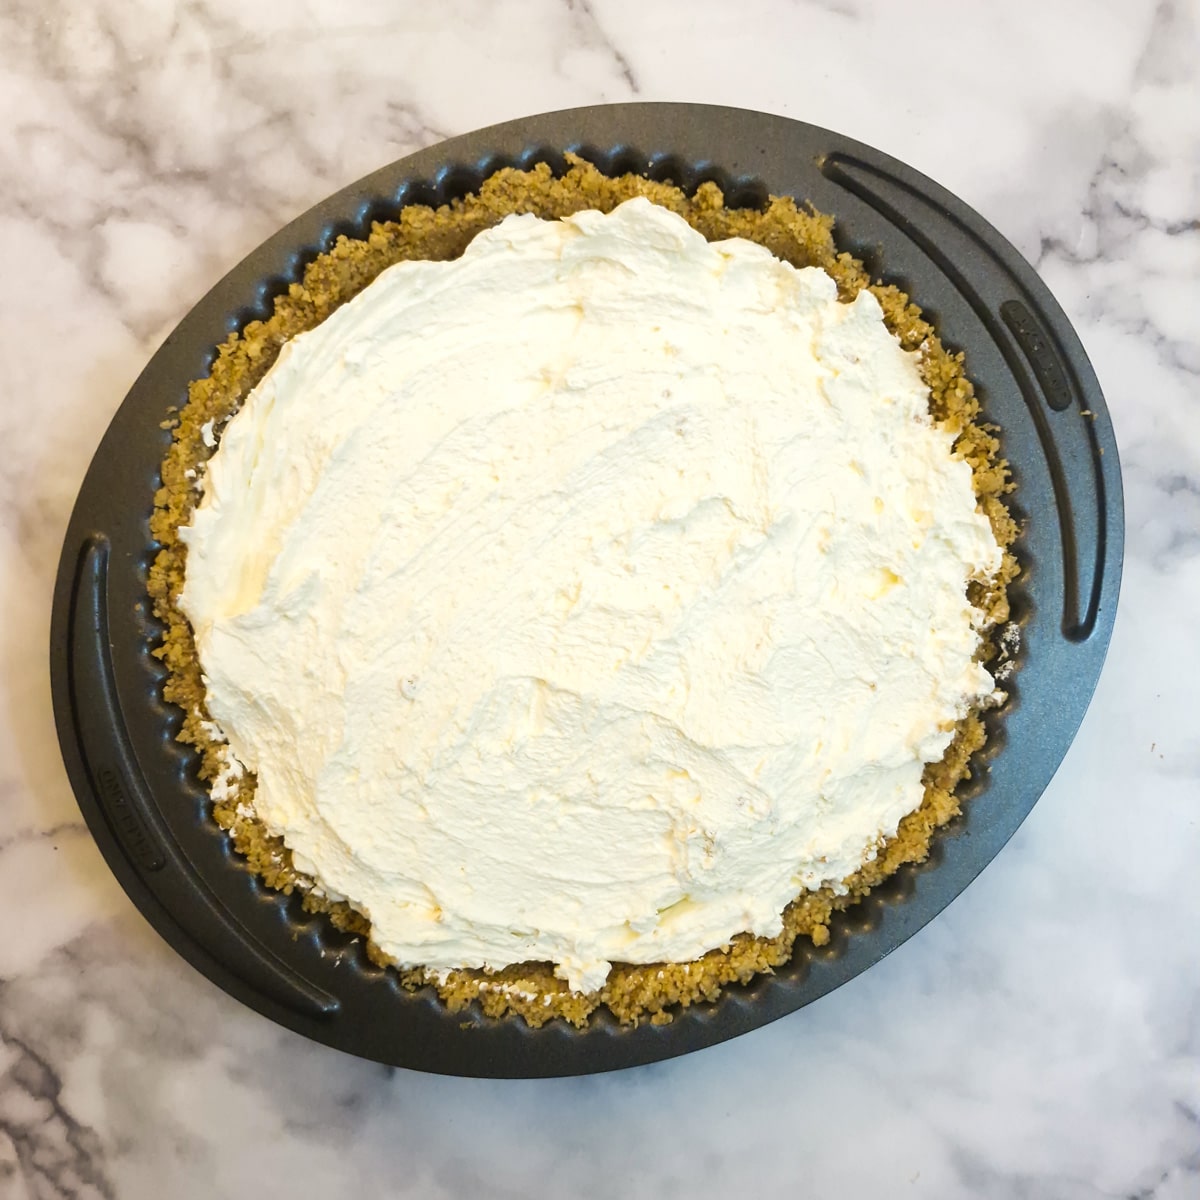 Whipped cream spread on top of a banoffee pie.